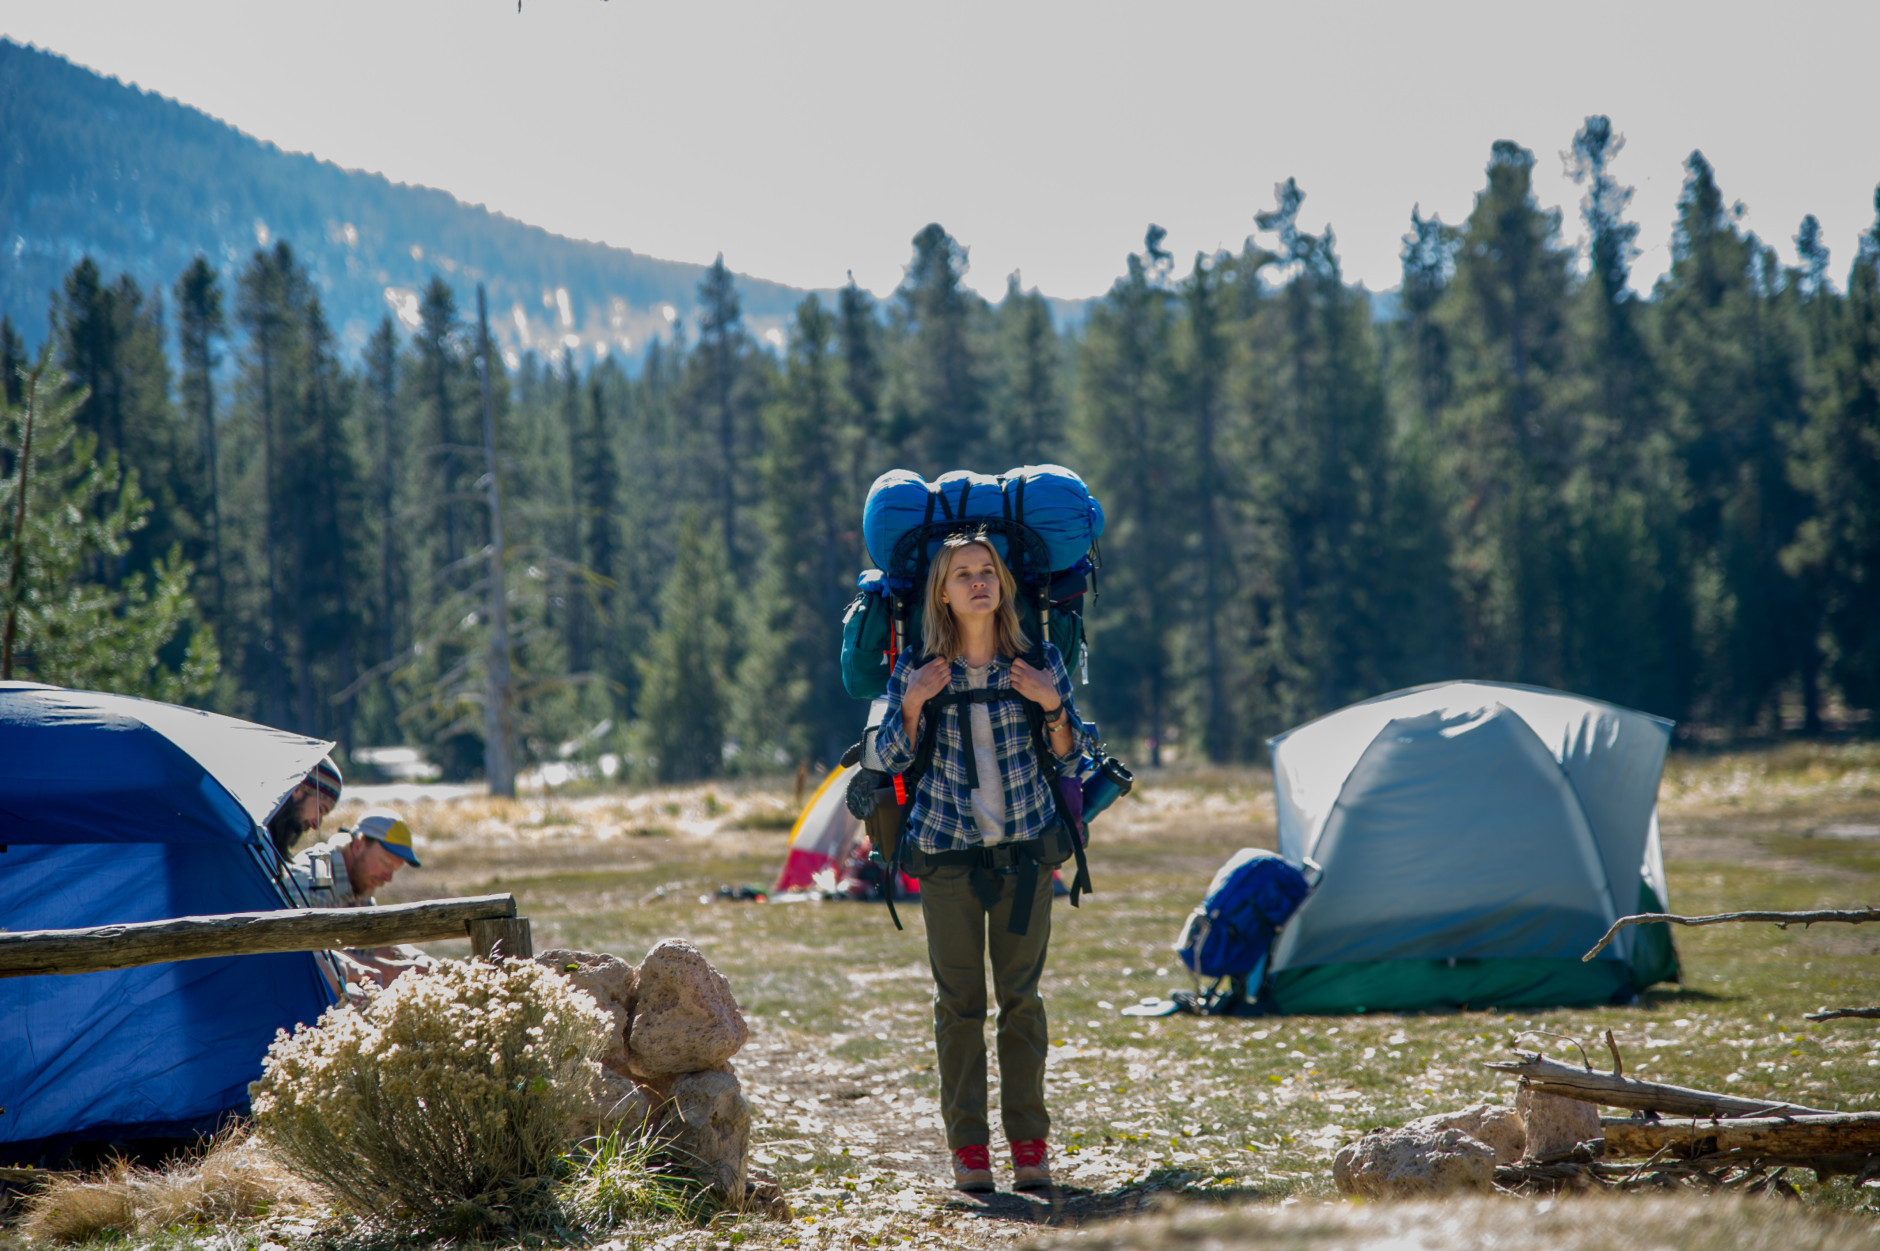 This image released by Fox Searchlight Pictures shows Reese Witherspoon in a scene from the film, "Wild." The movie Wild, which is based on the book by author, Cheryl Strayed, and which received Oscar nominations for best actress for Witherspoon and best supporting actress, for Laura Dern, has also increased interest in the Pacific Crest Trail. (AP Photo/Fox Searchlight Pictures, Anne Marie Fox)